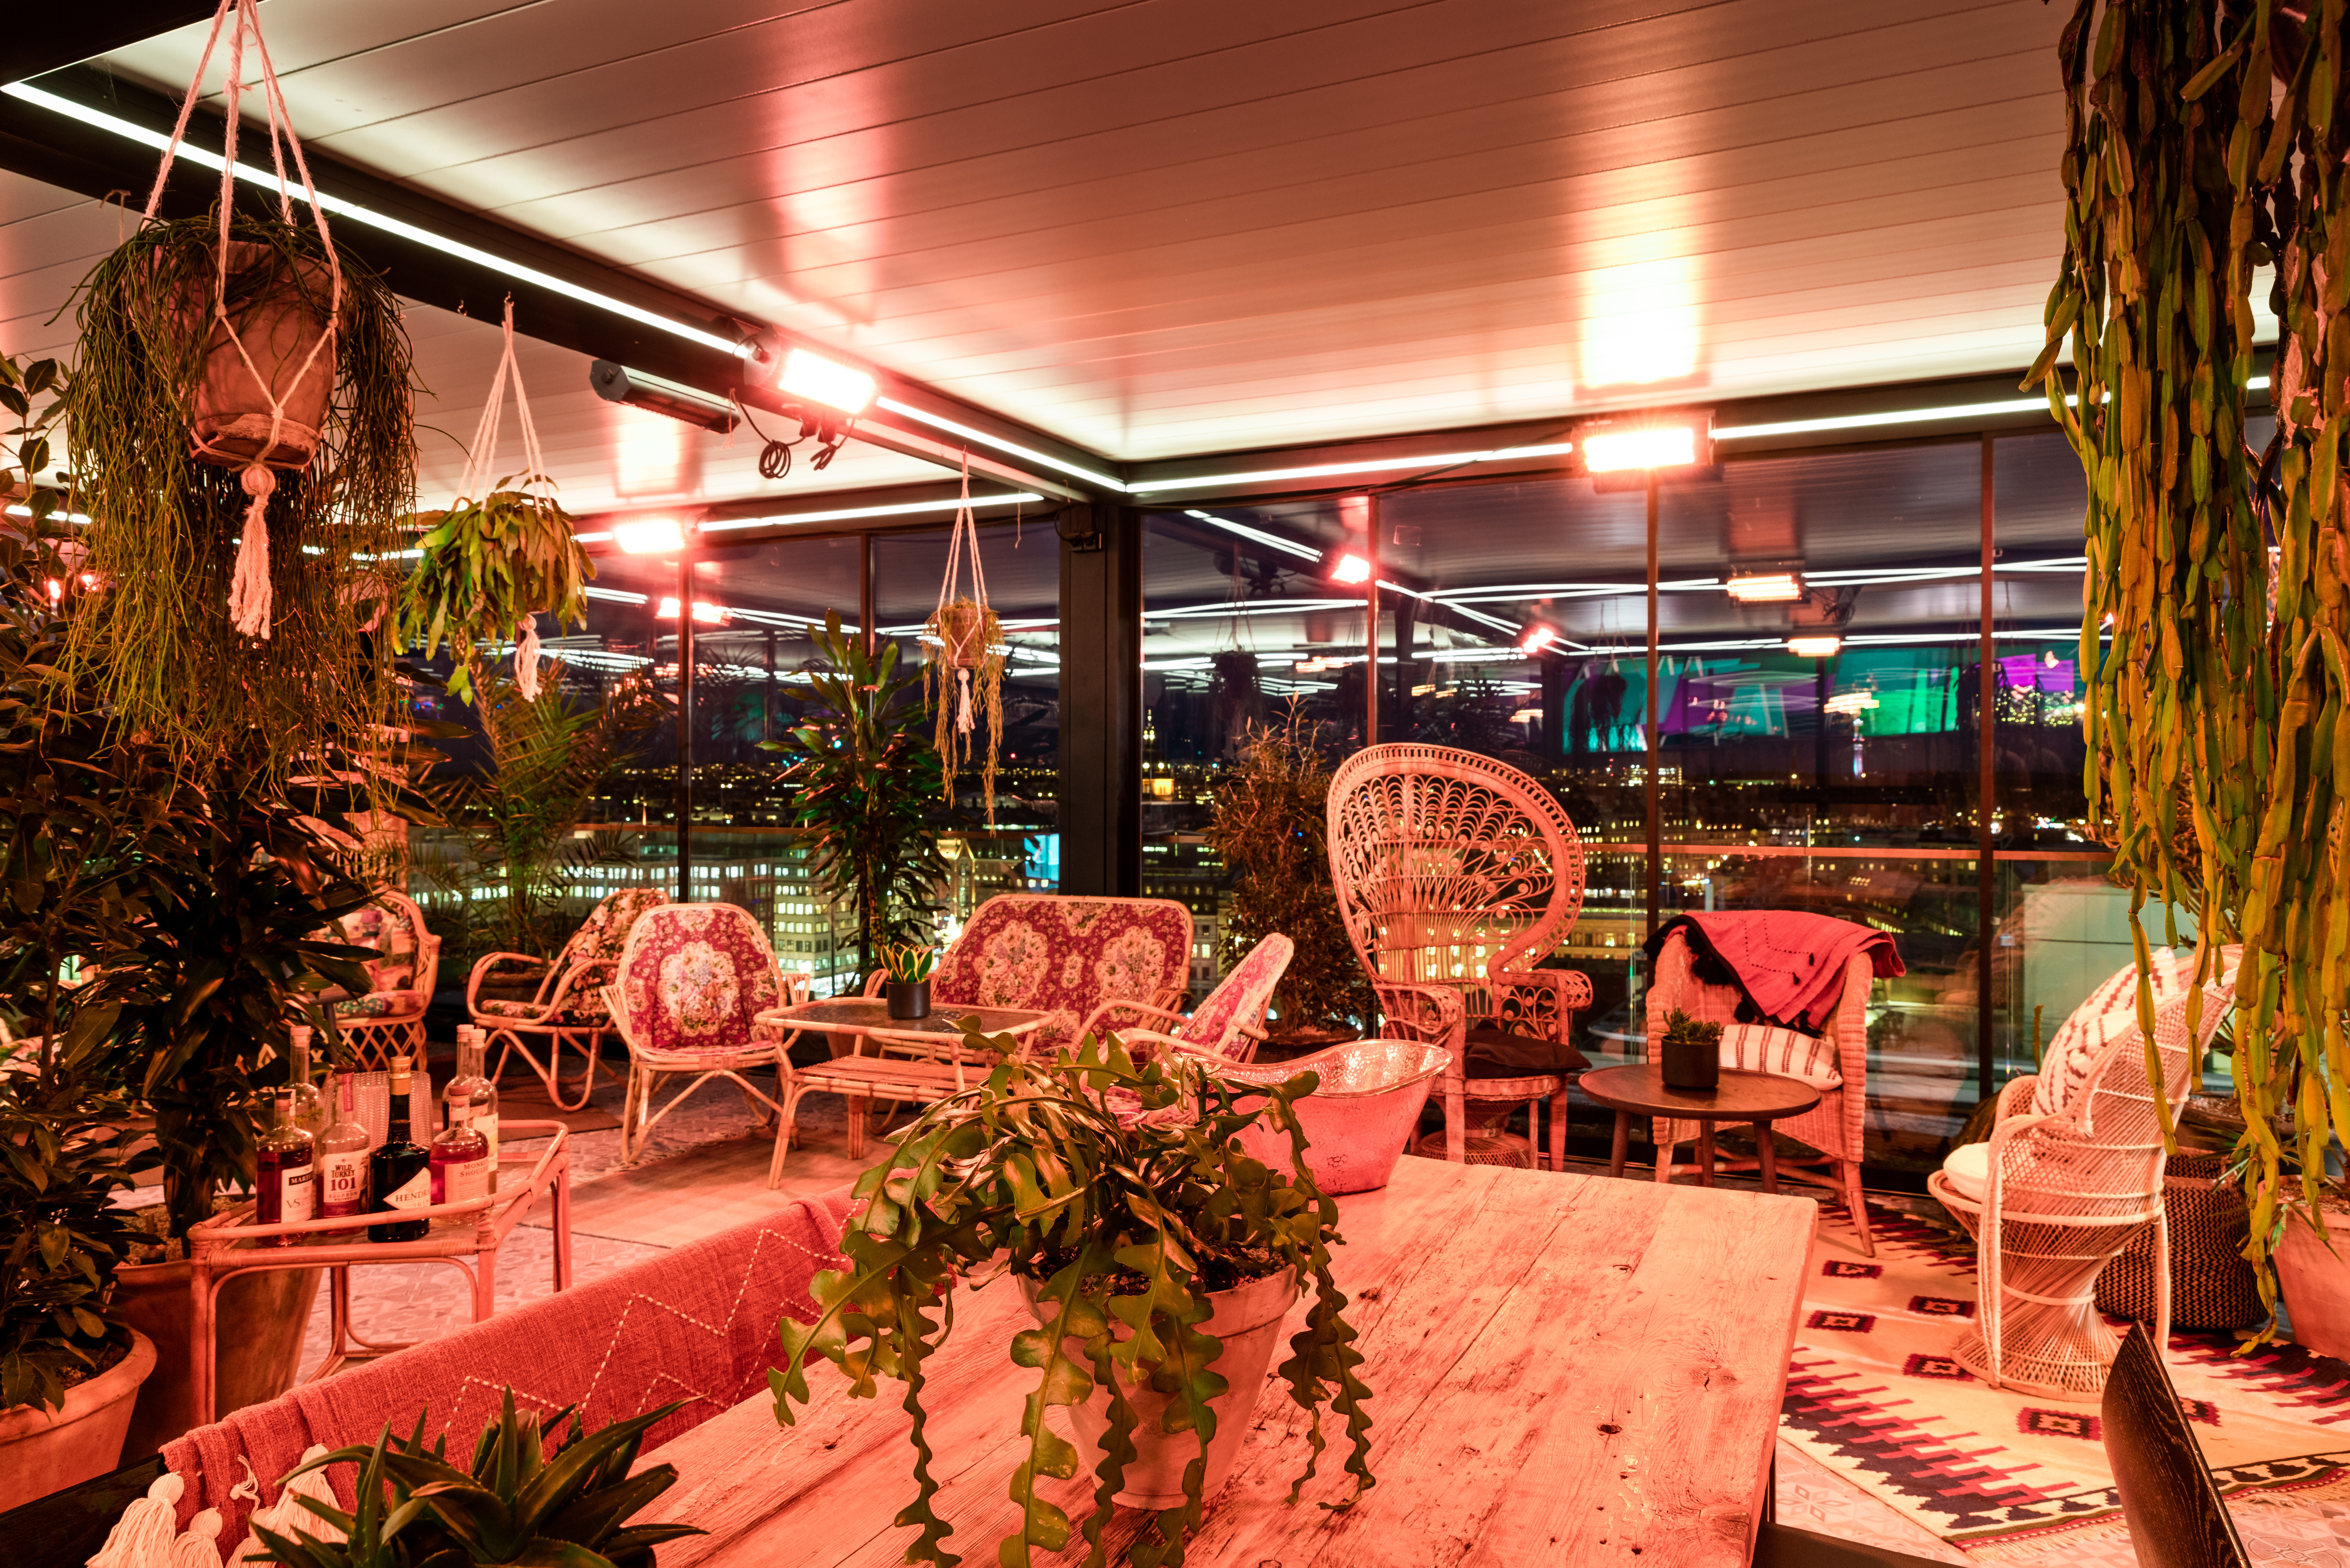 Molnet, a private space in our rooftop park